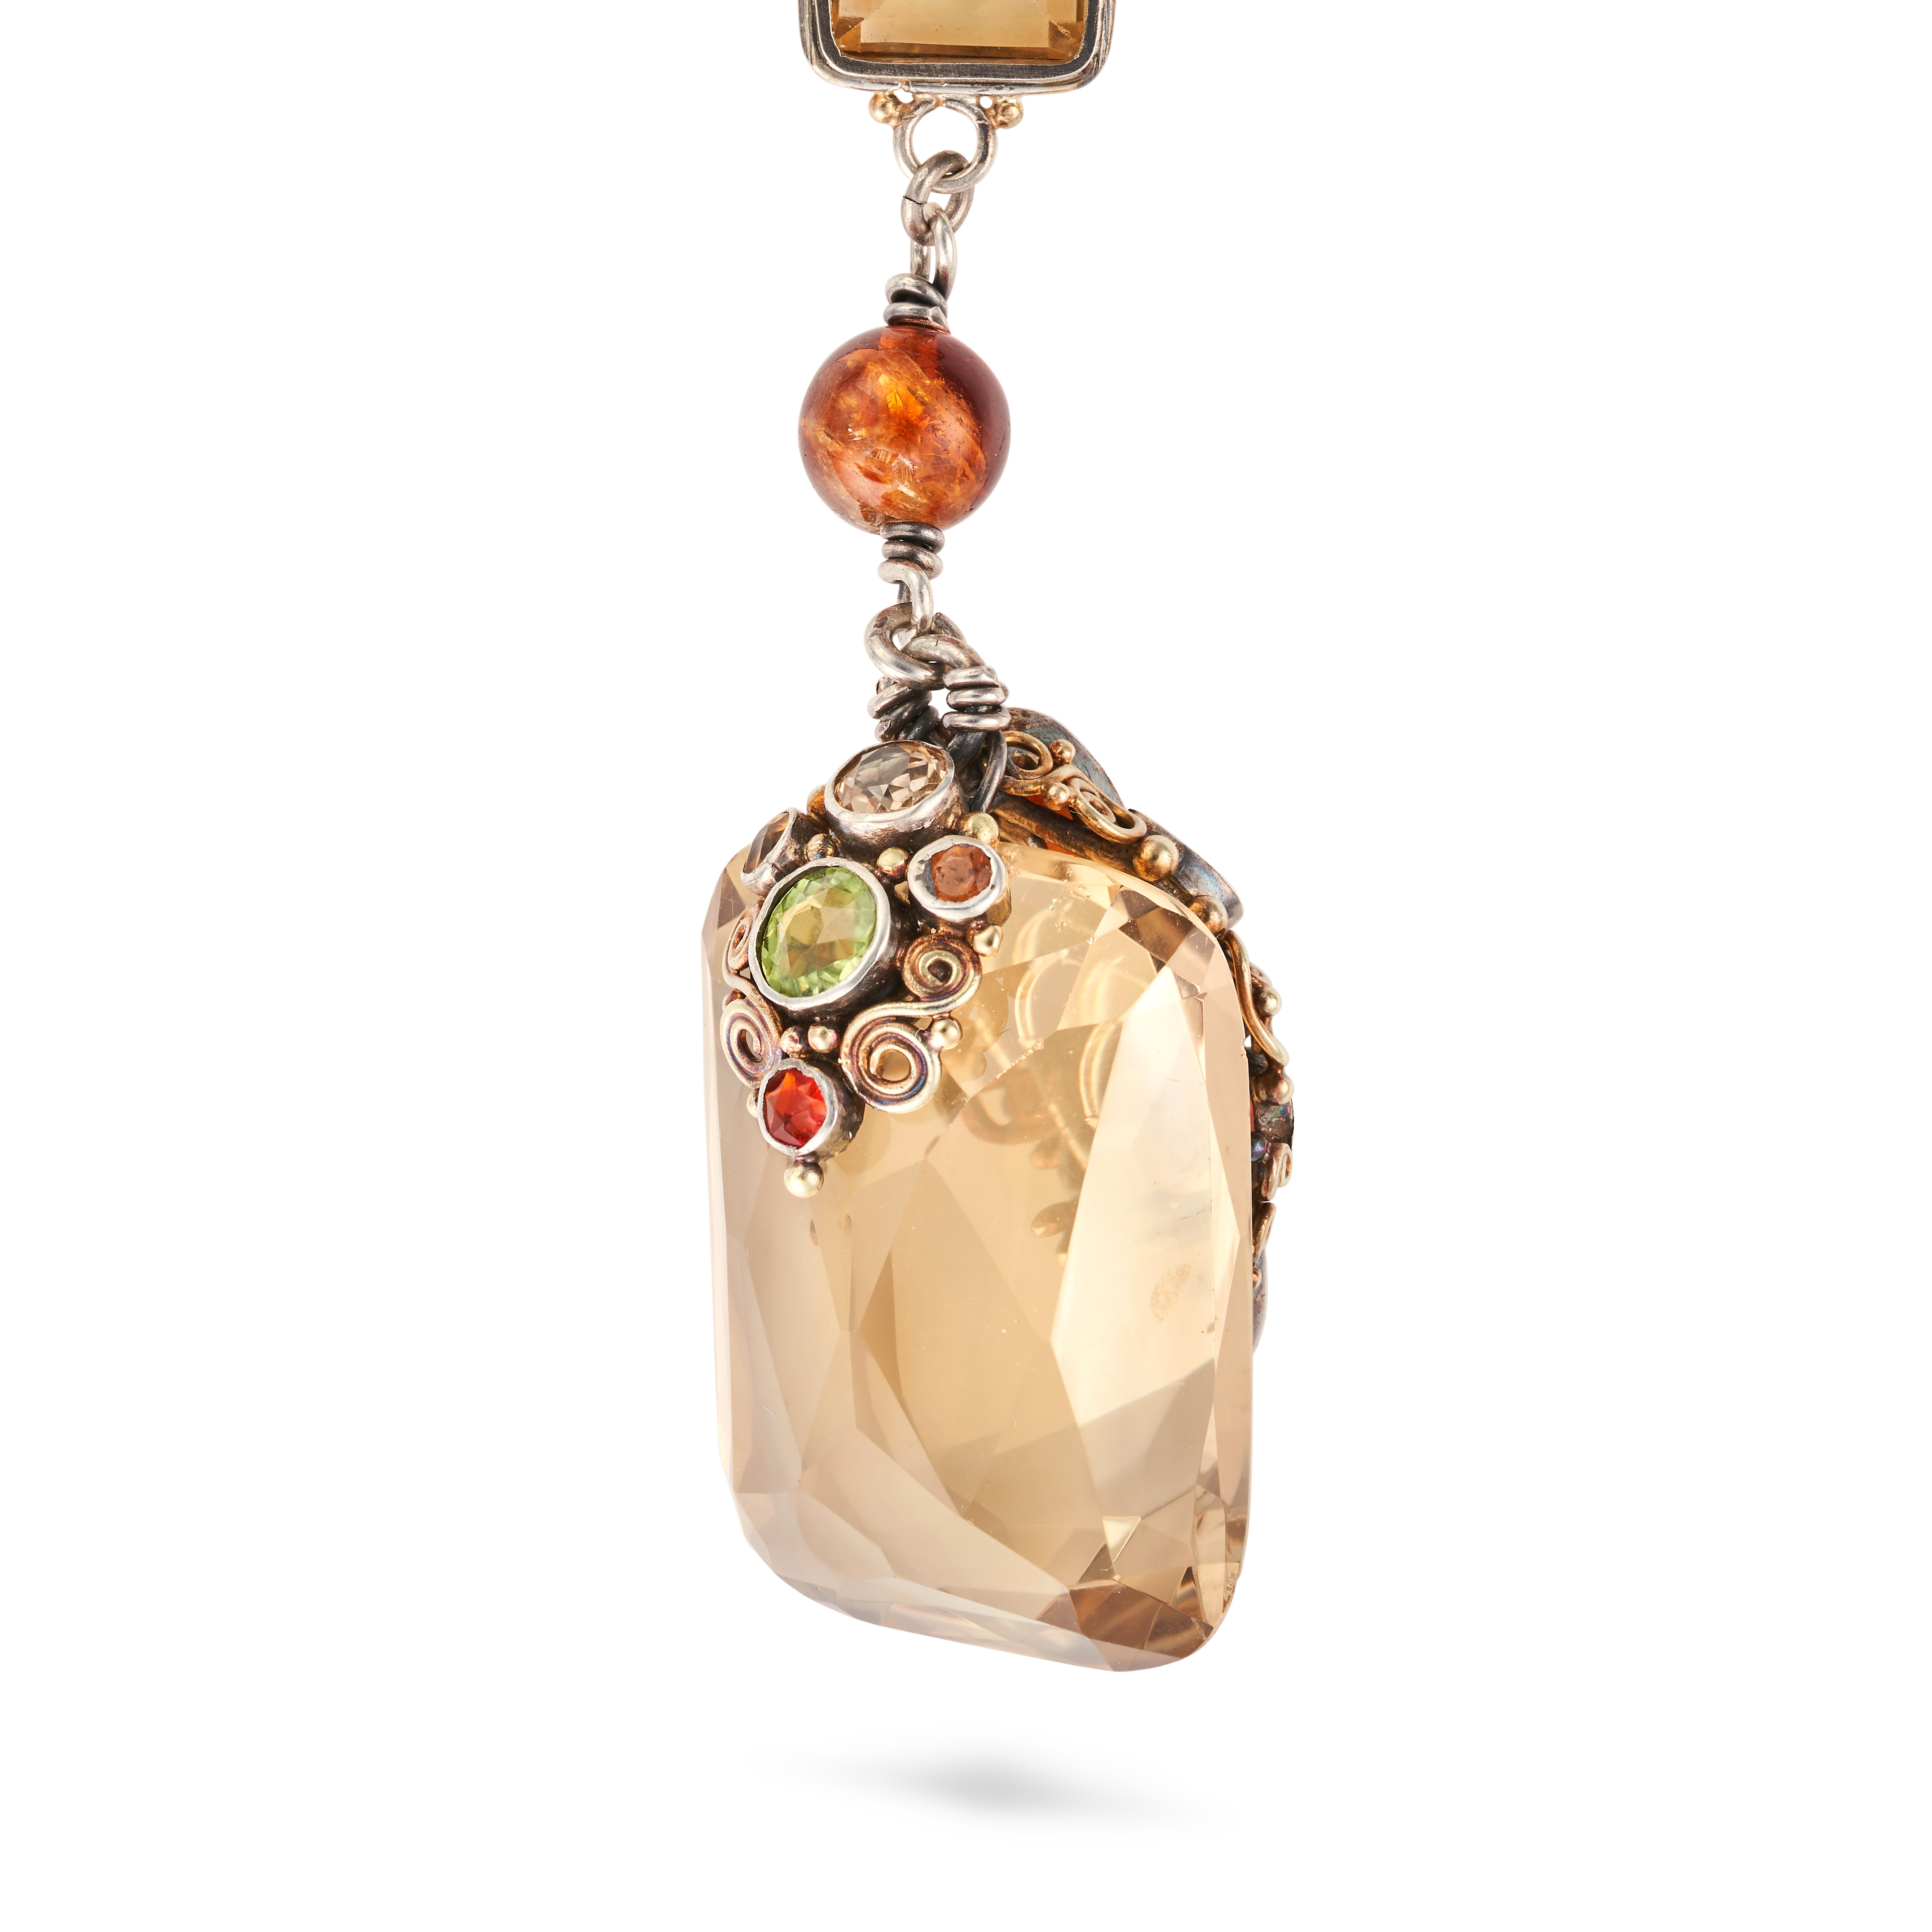 ATTR DORRIE NOSSITER, AN ARTS AND CRAFTS CITRINE, AMBER, HESSONITE GARNET AND PERIDOT PENDANT NEC... - Image 2 of 2